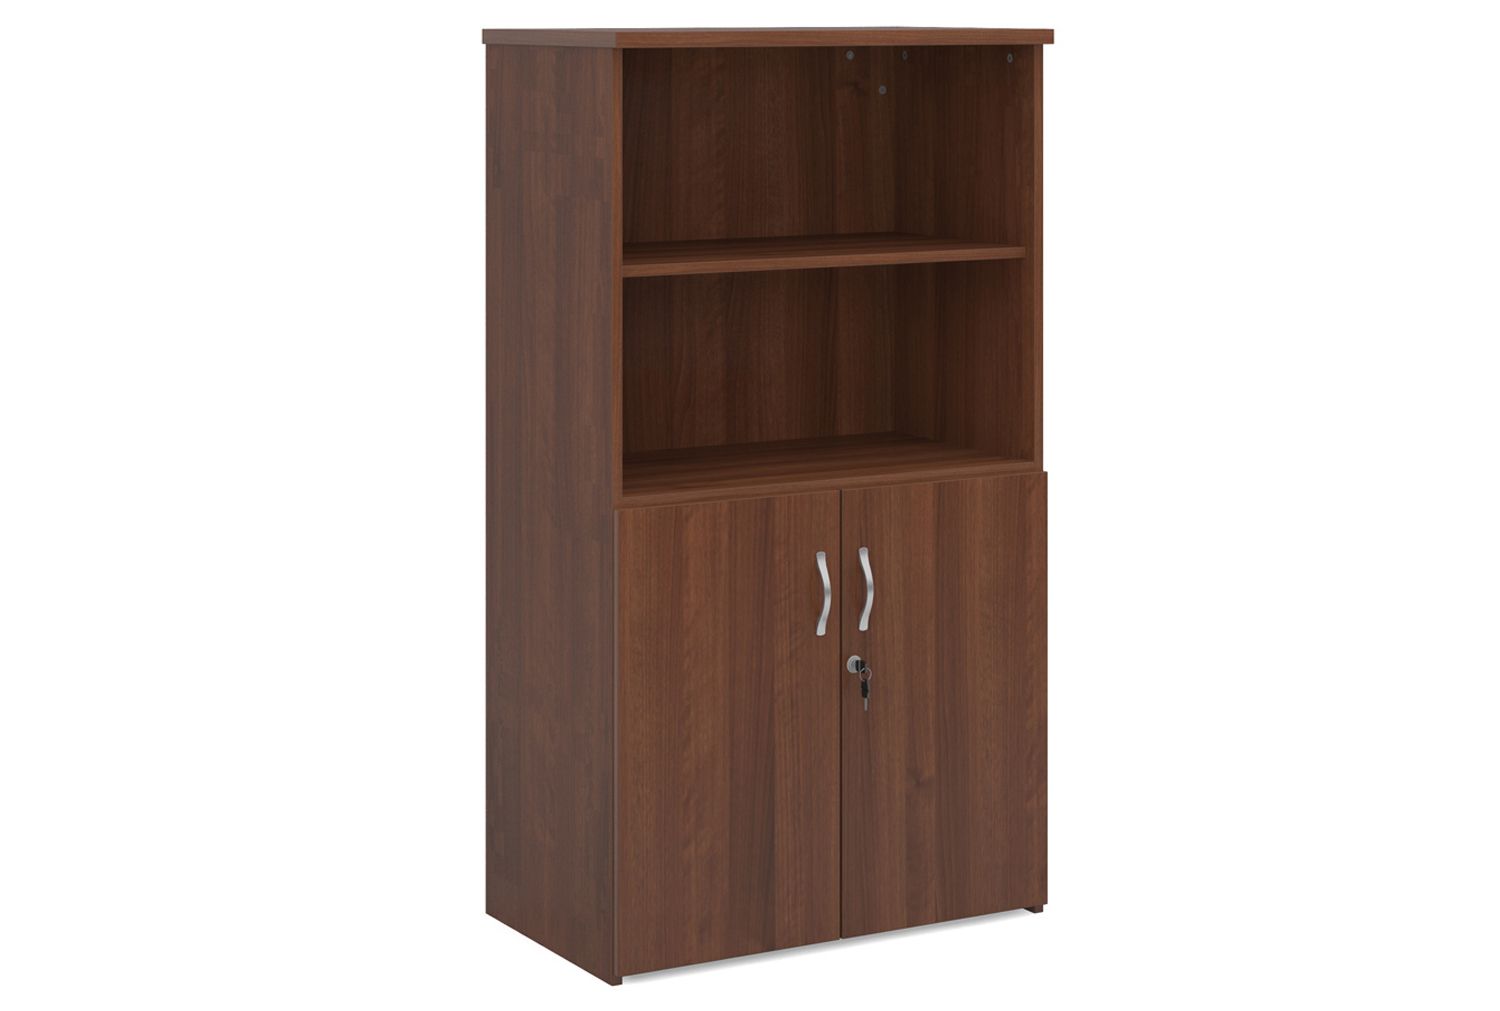 All Walnut Open Top Office Cupboards, 3 Shelf - 80wx47dx144h (cm), Express Delivery